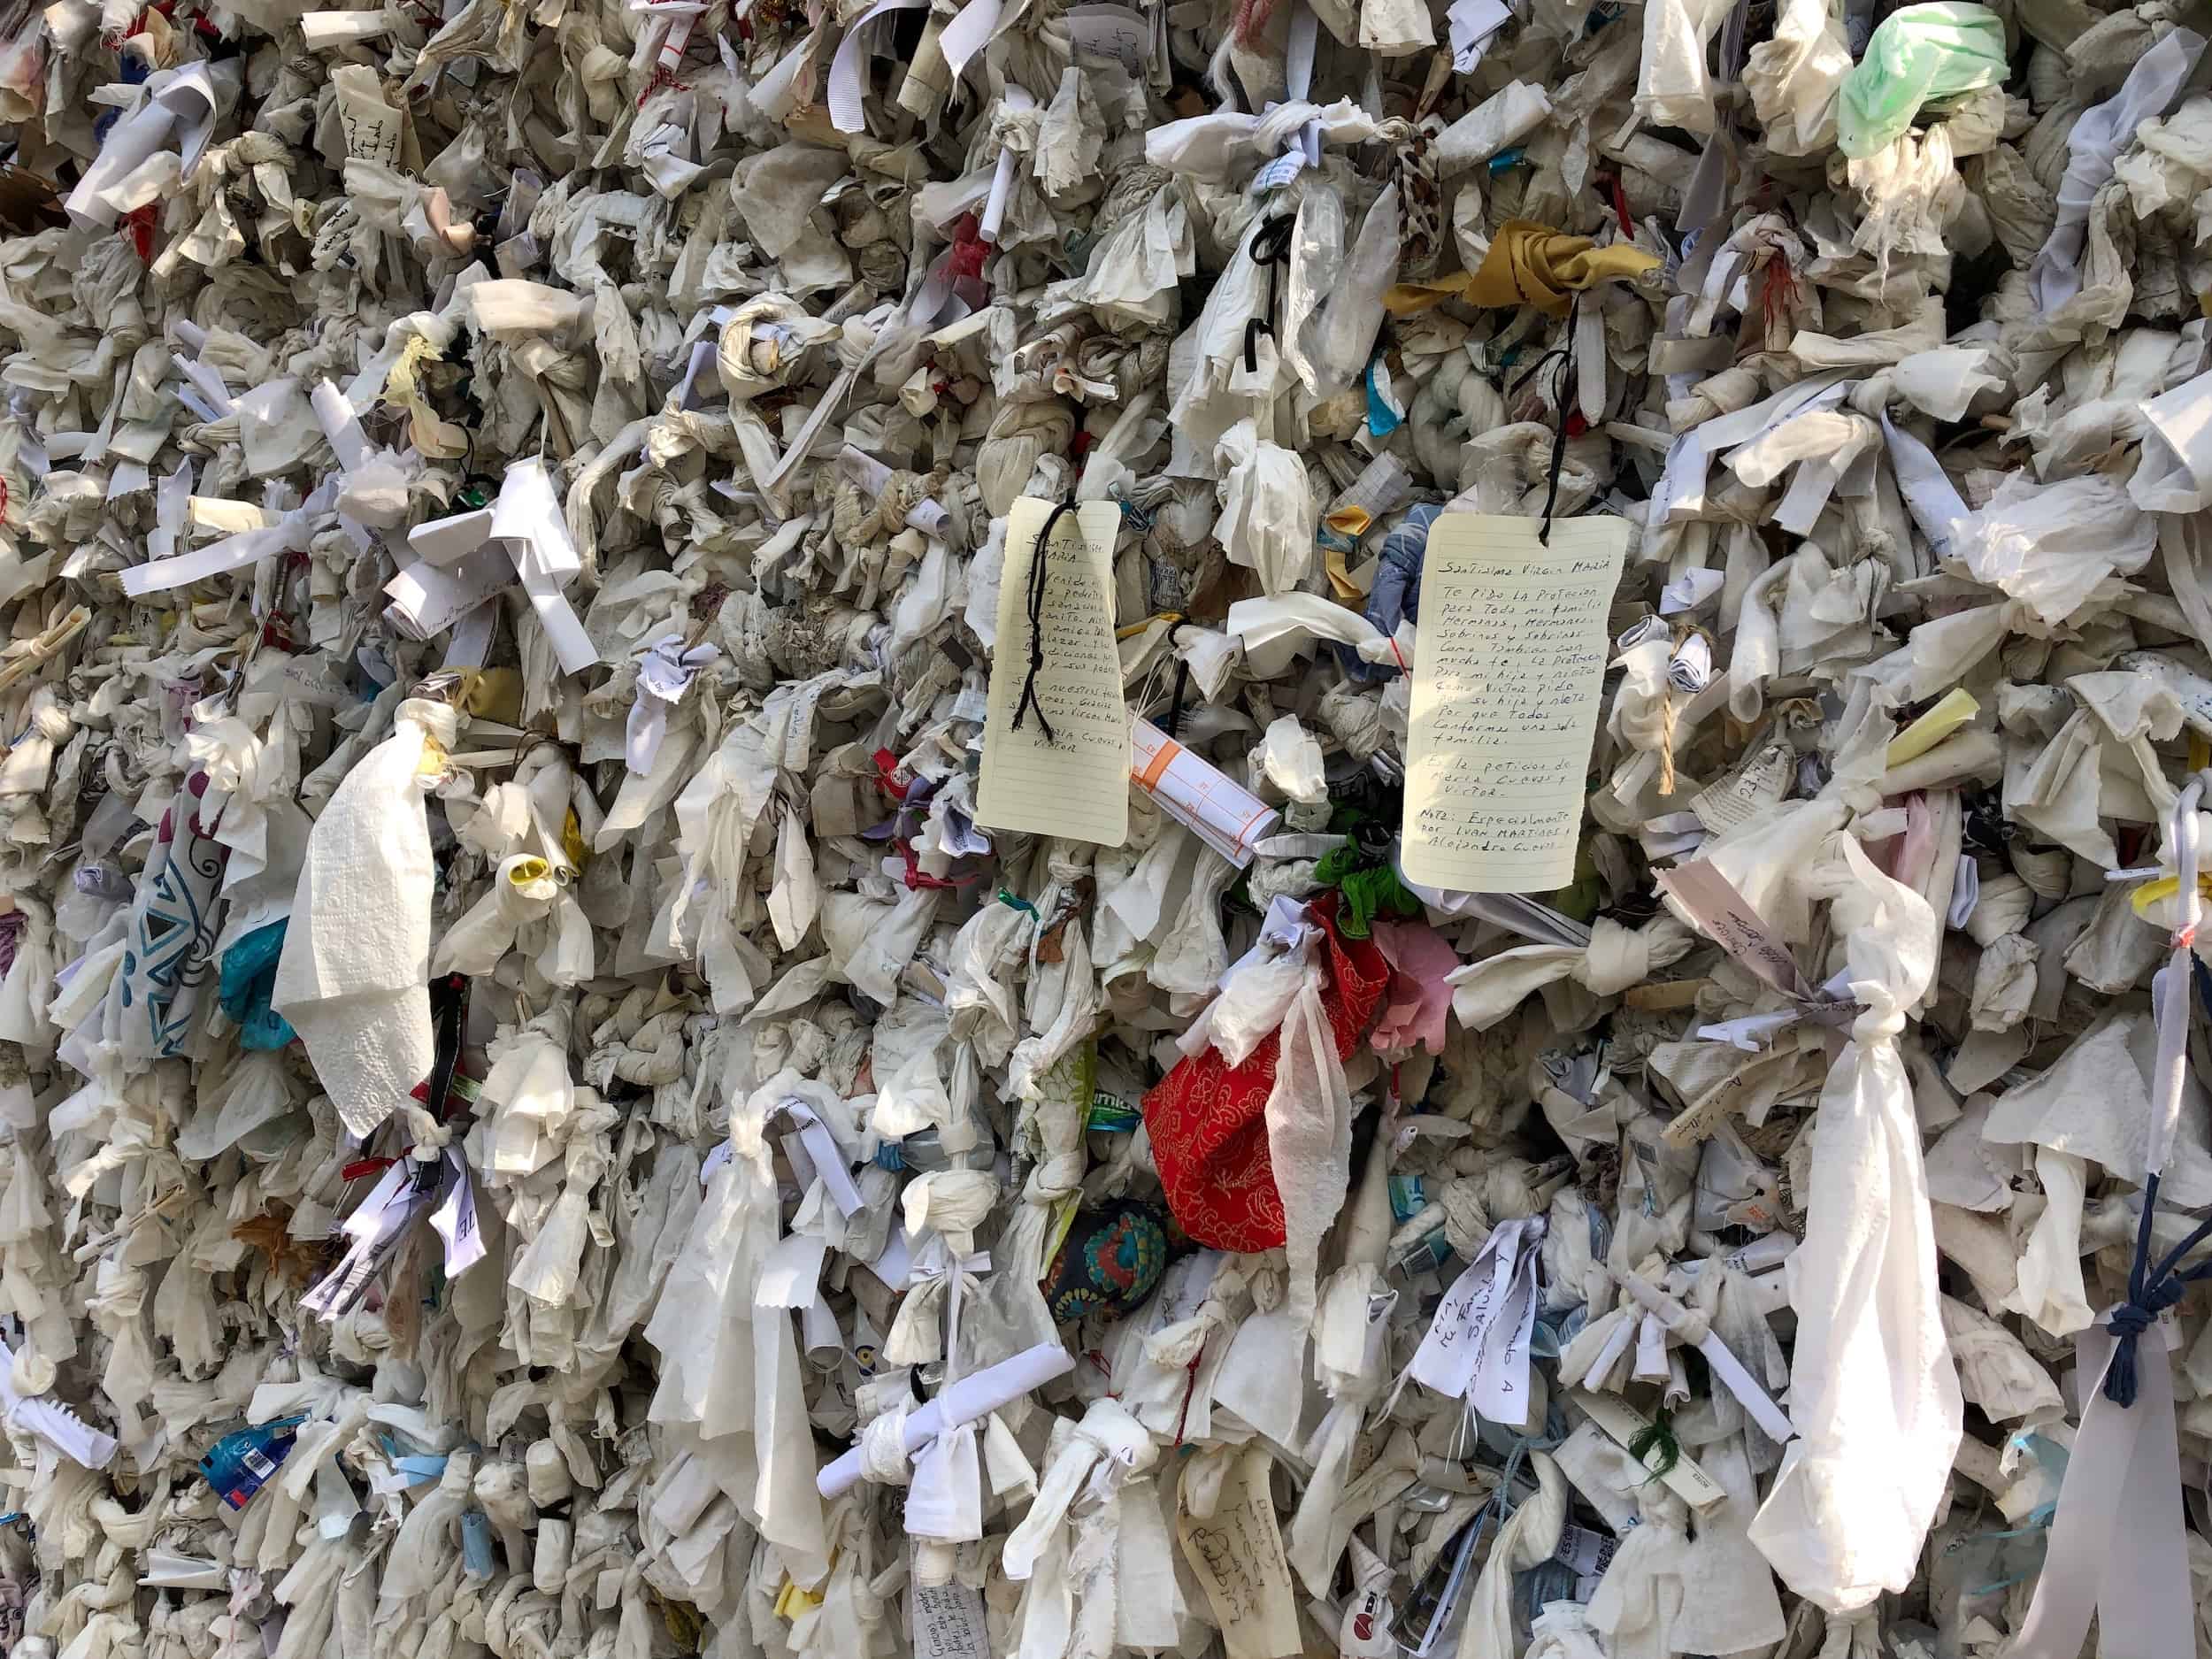 Cloths and prayers tied to the wall at the House of the Virgin Mary in Selçuk, Turkey